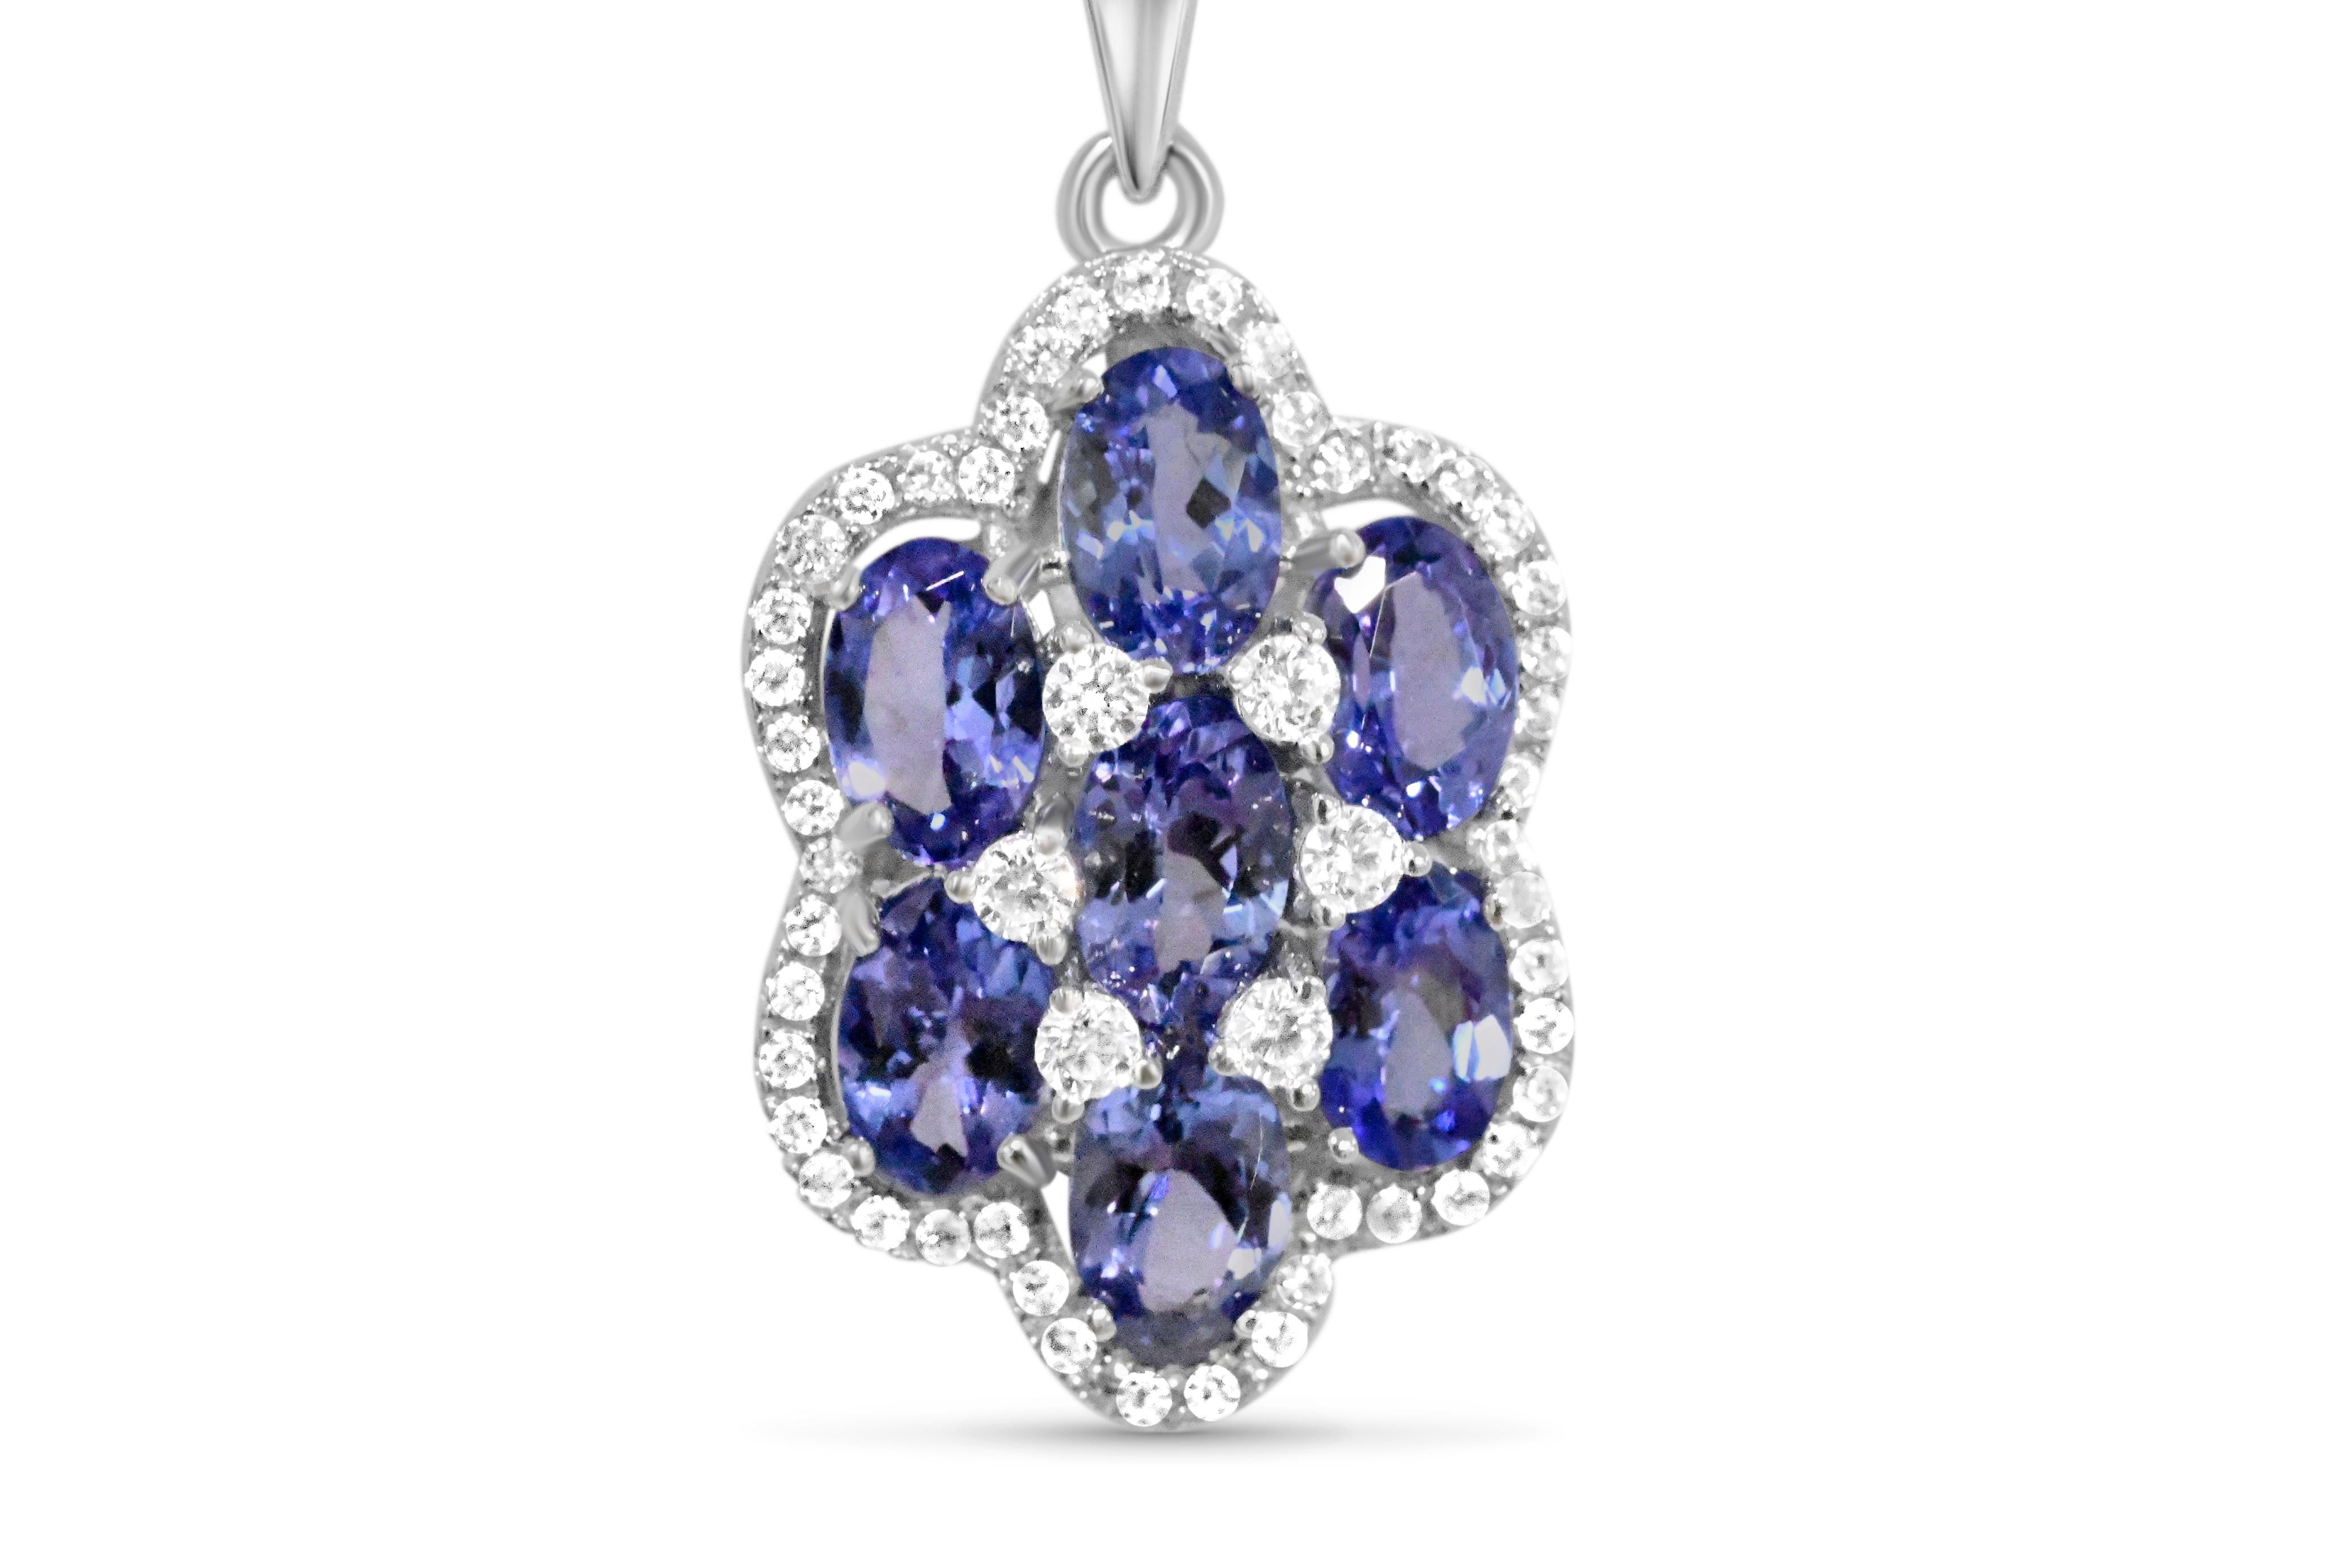 Tanzanite 925 Rhodium  Metal Platted Women's Pendant 3.36cts
Primary Stone: Tanzanite
Stone Shape:6 x 4mm Oval
Stone Weight : 3.36cts
No of stone: 7 pieces

Secondary Stone: White CZ
NO of Stone: 60 pieces
Other Stone : White CZ